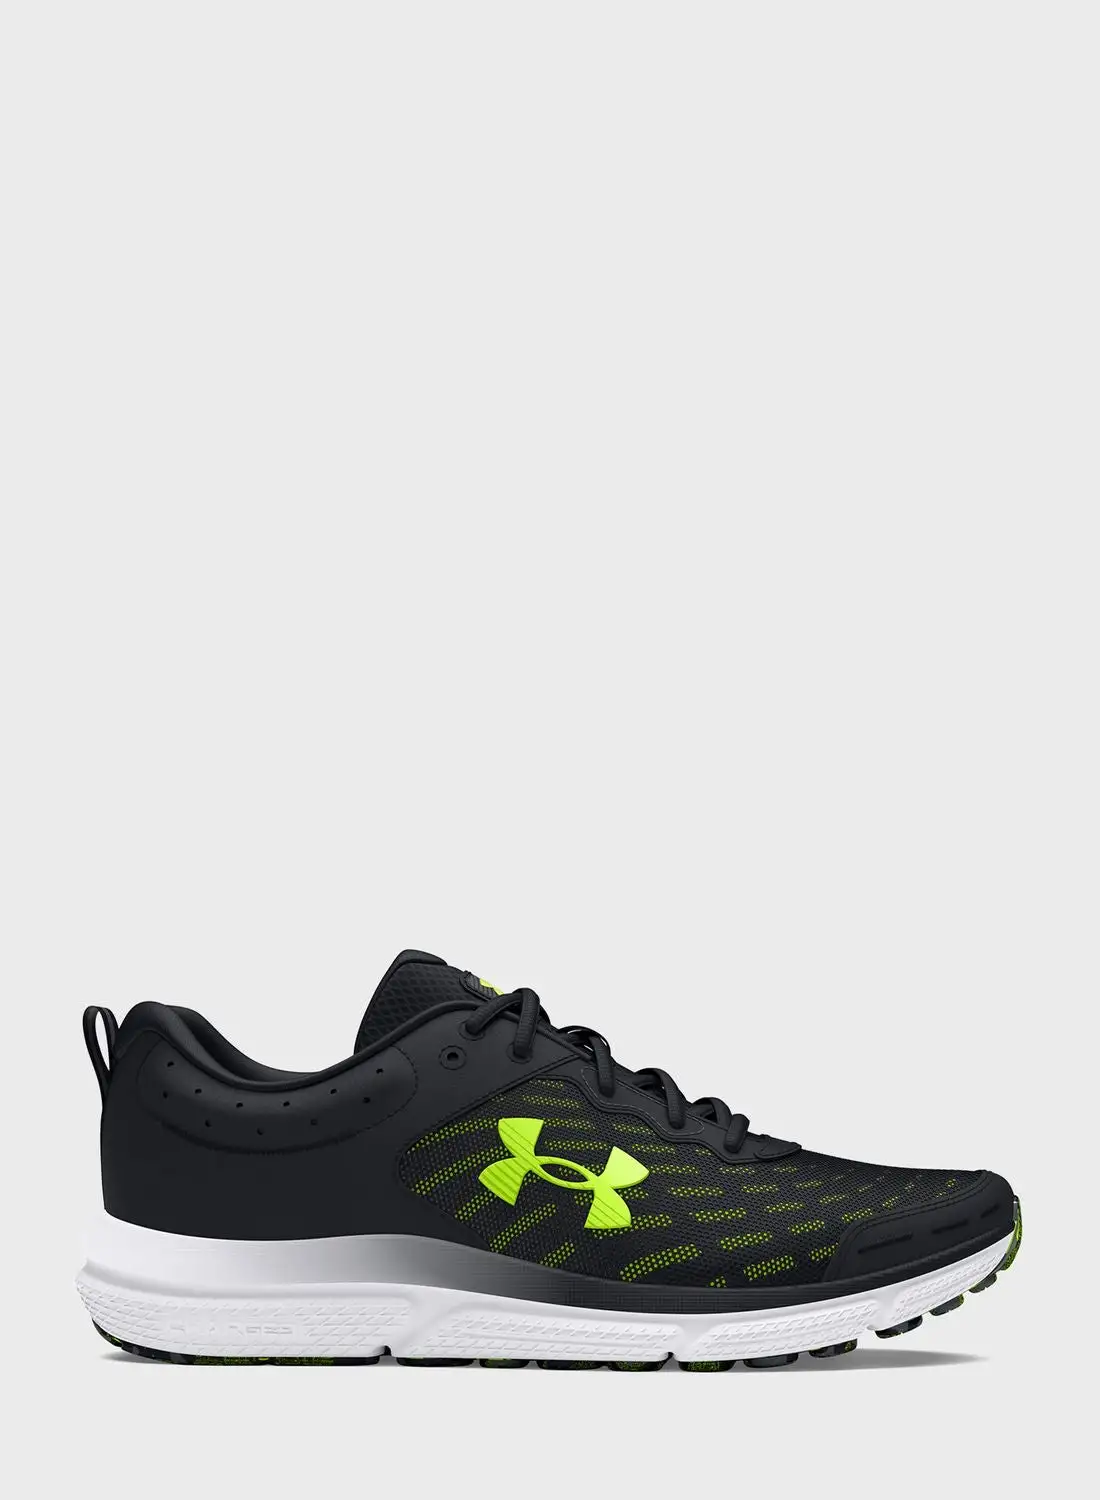 UNDER ARMOUR Charged Assert 10 Running Shoes